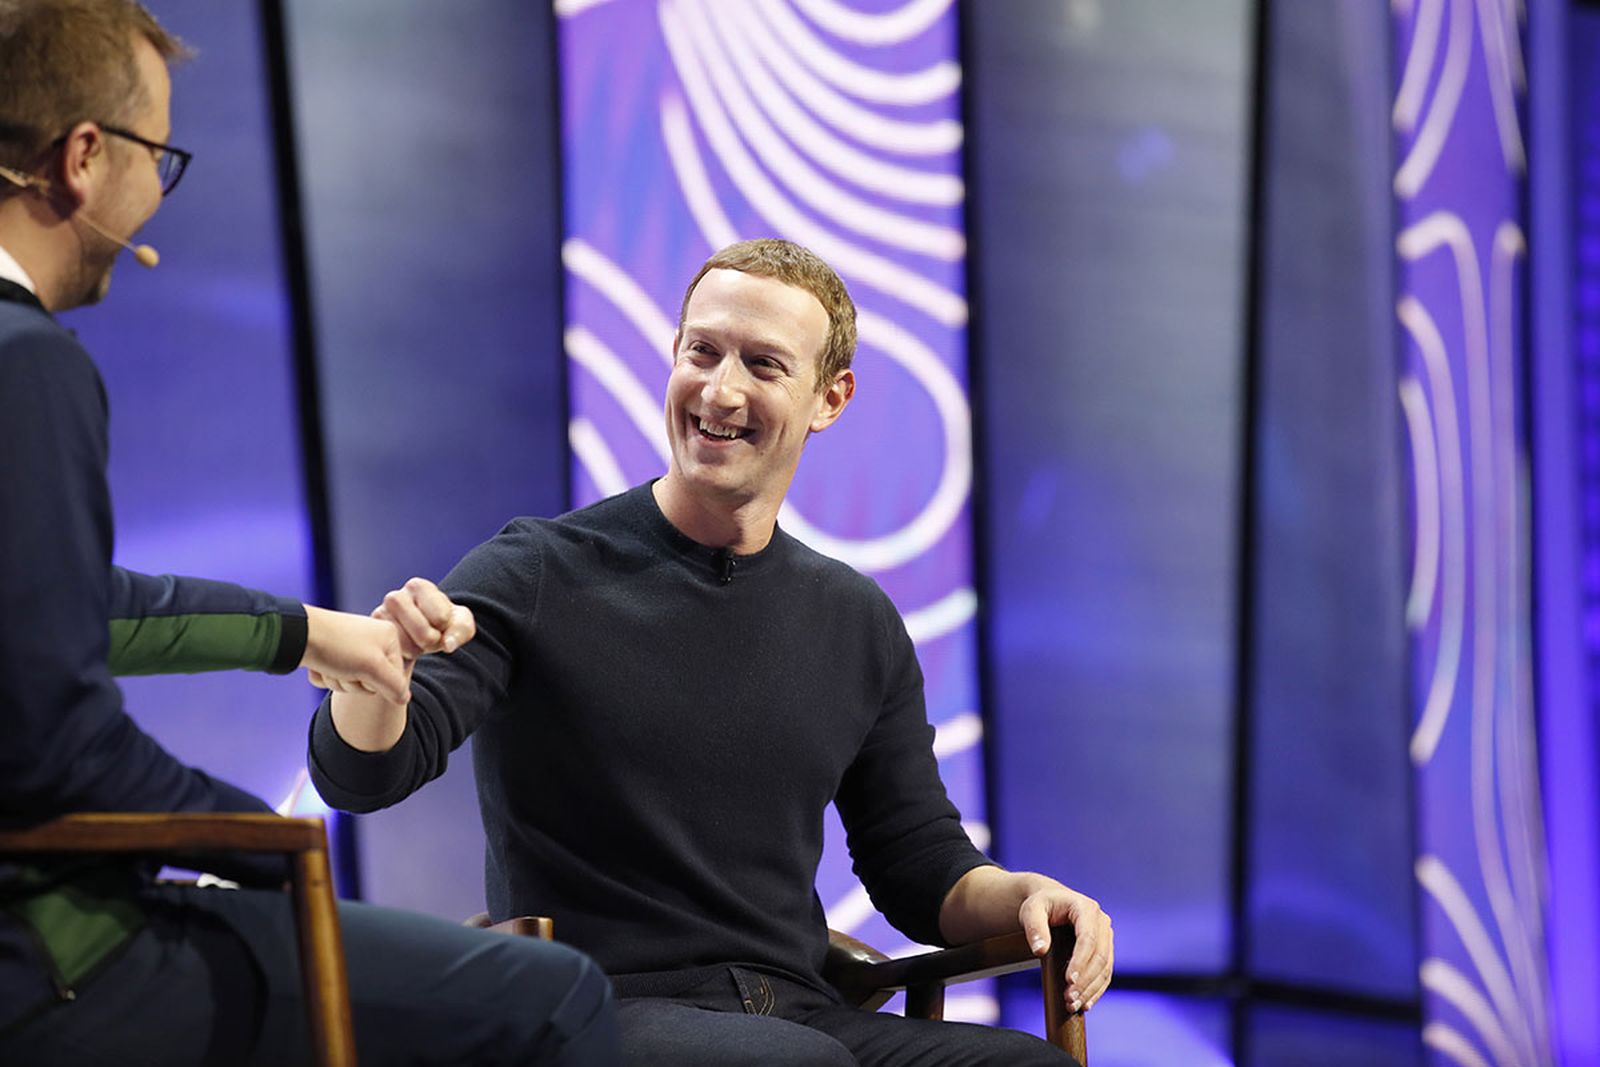 Facebook CEO Mark Zuckerberg & Key Speakers At The Silicon Slopes Summit